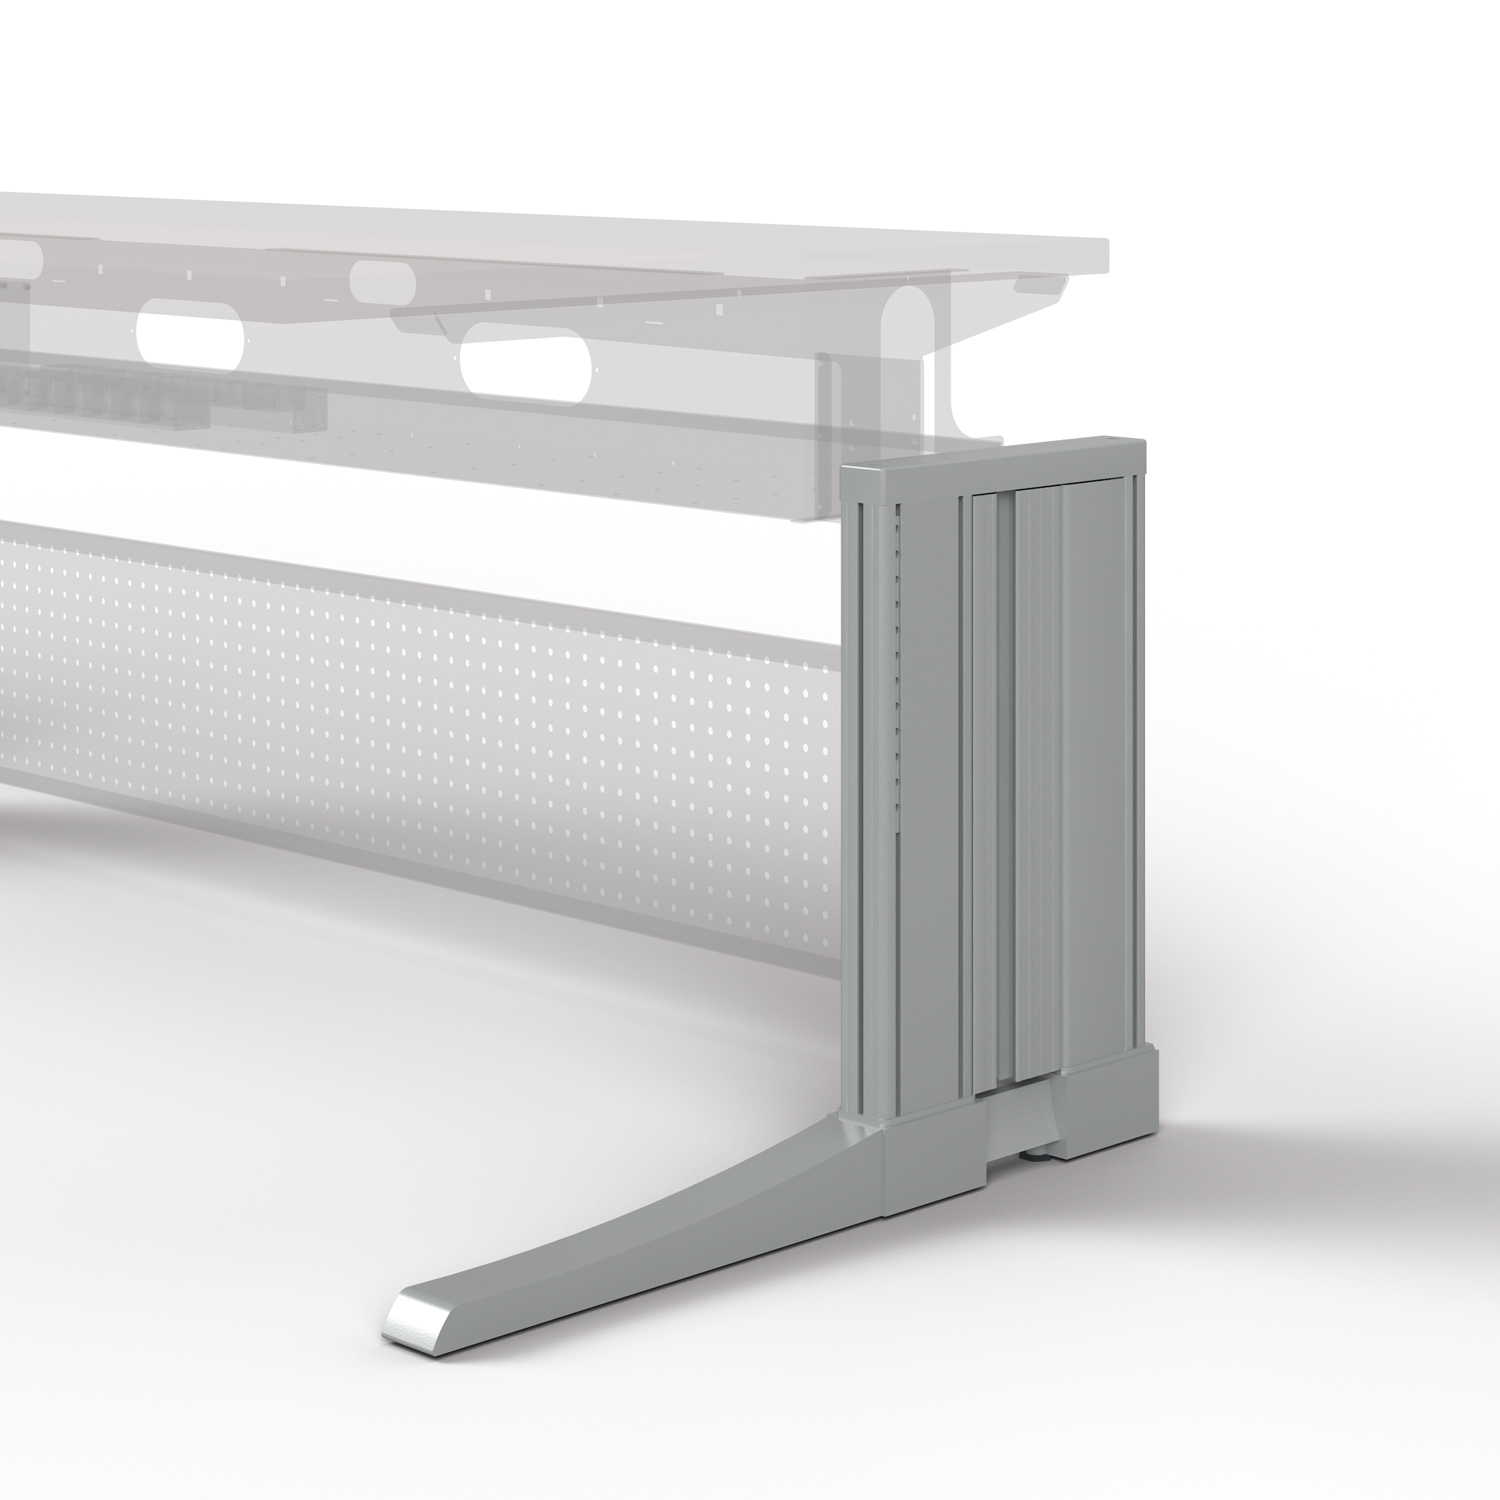 VC Side Section Center Height Adjustable Vertiv Knurr Workstations Elicon Consoles ESD Products - 200.04.265.120.7